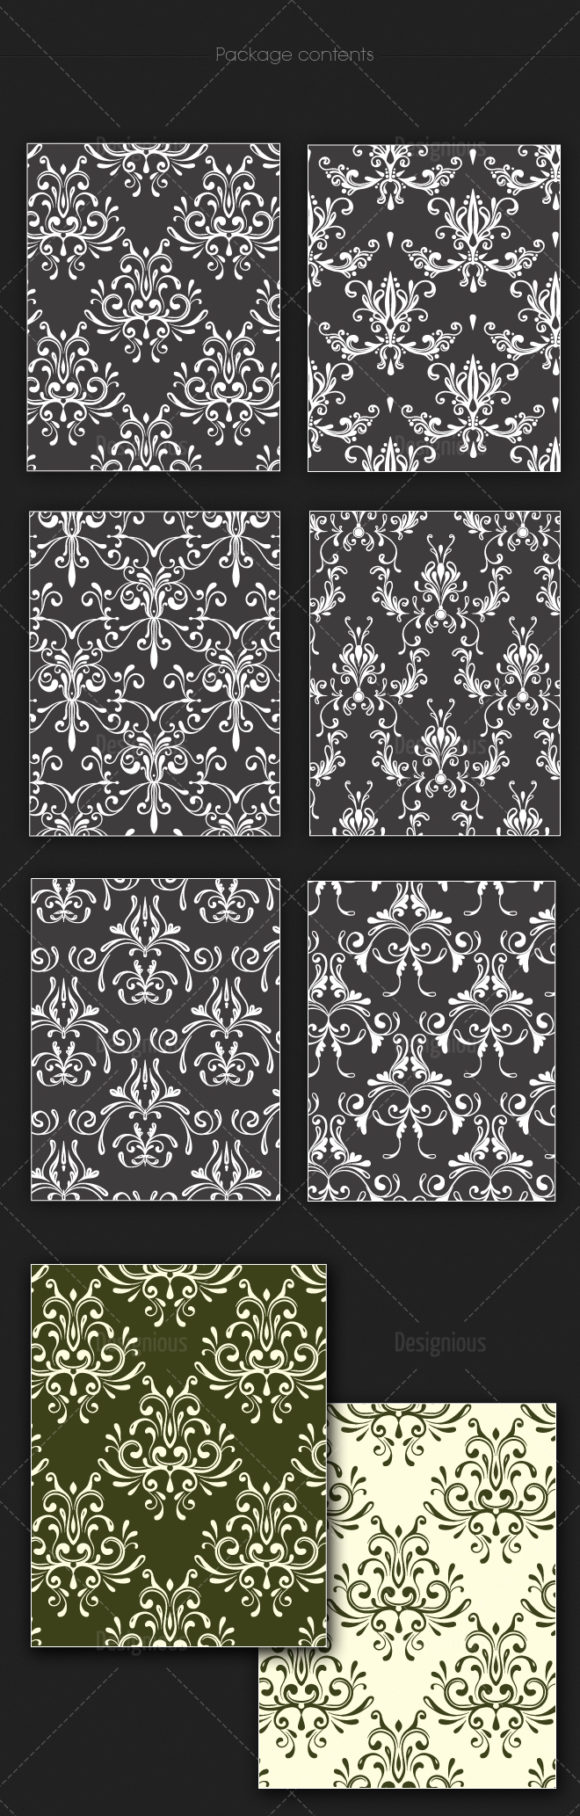 Seamless Patterns Vector Pack 128 2